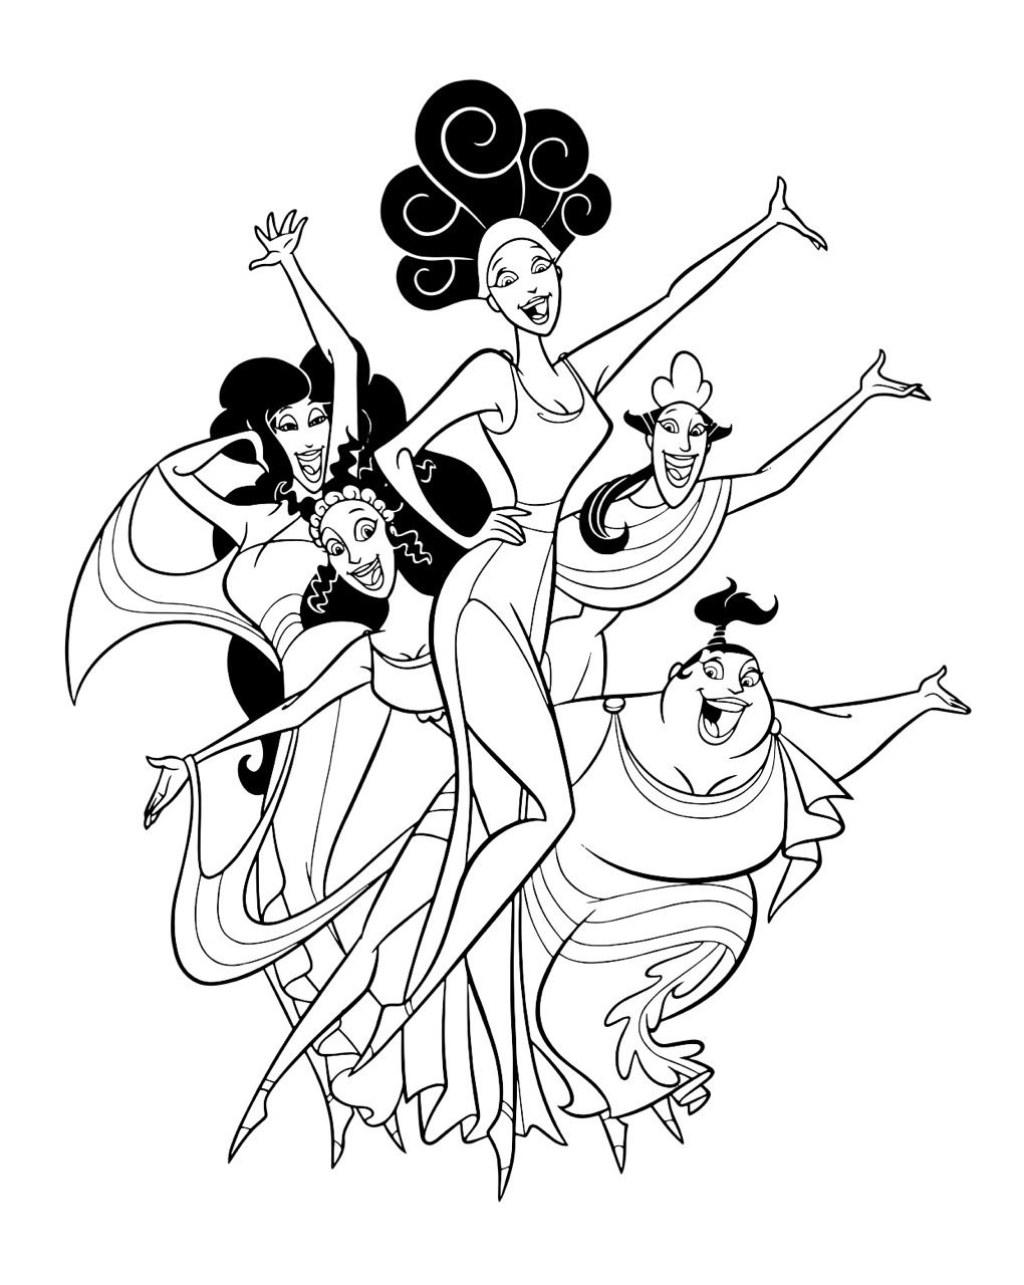 Picture of: Hercules coloring page  Coloring book art, Disney coloring pages